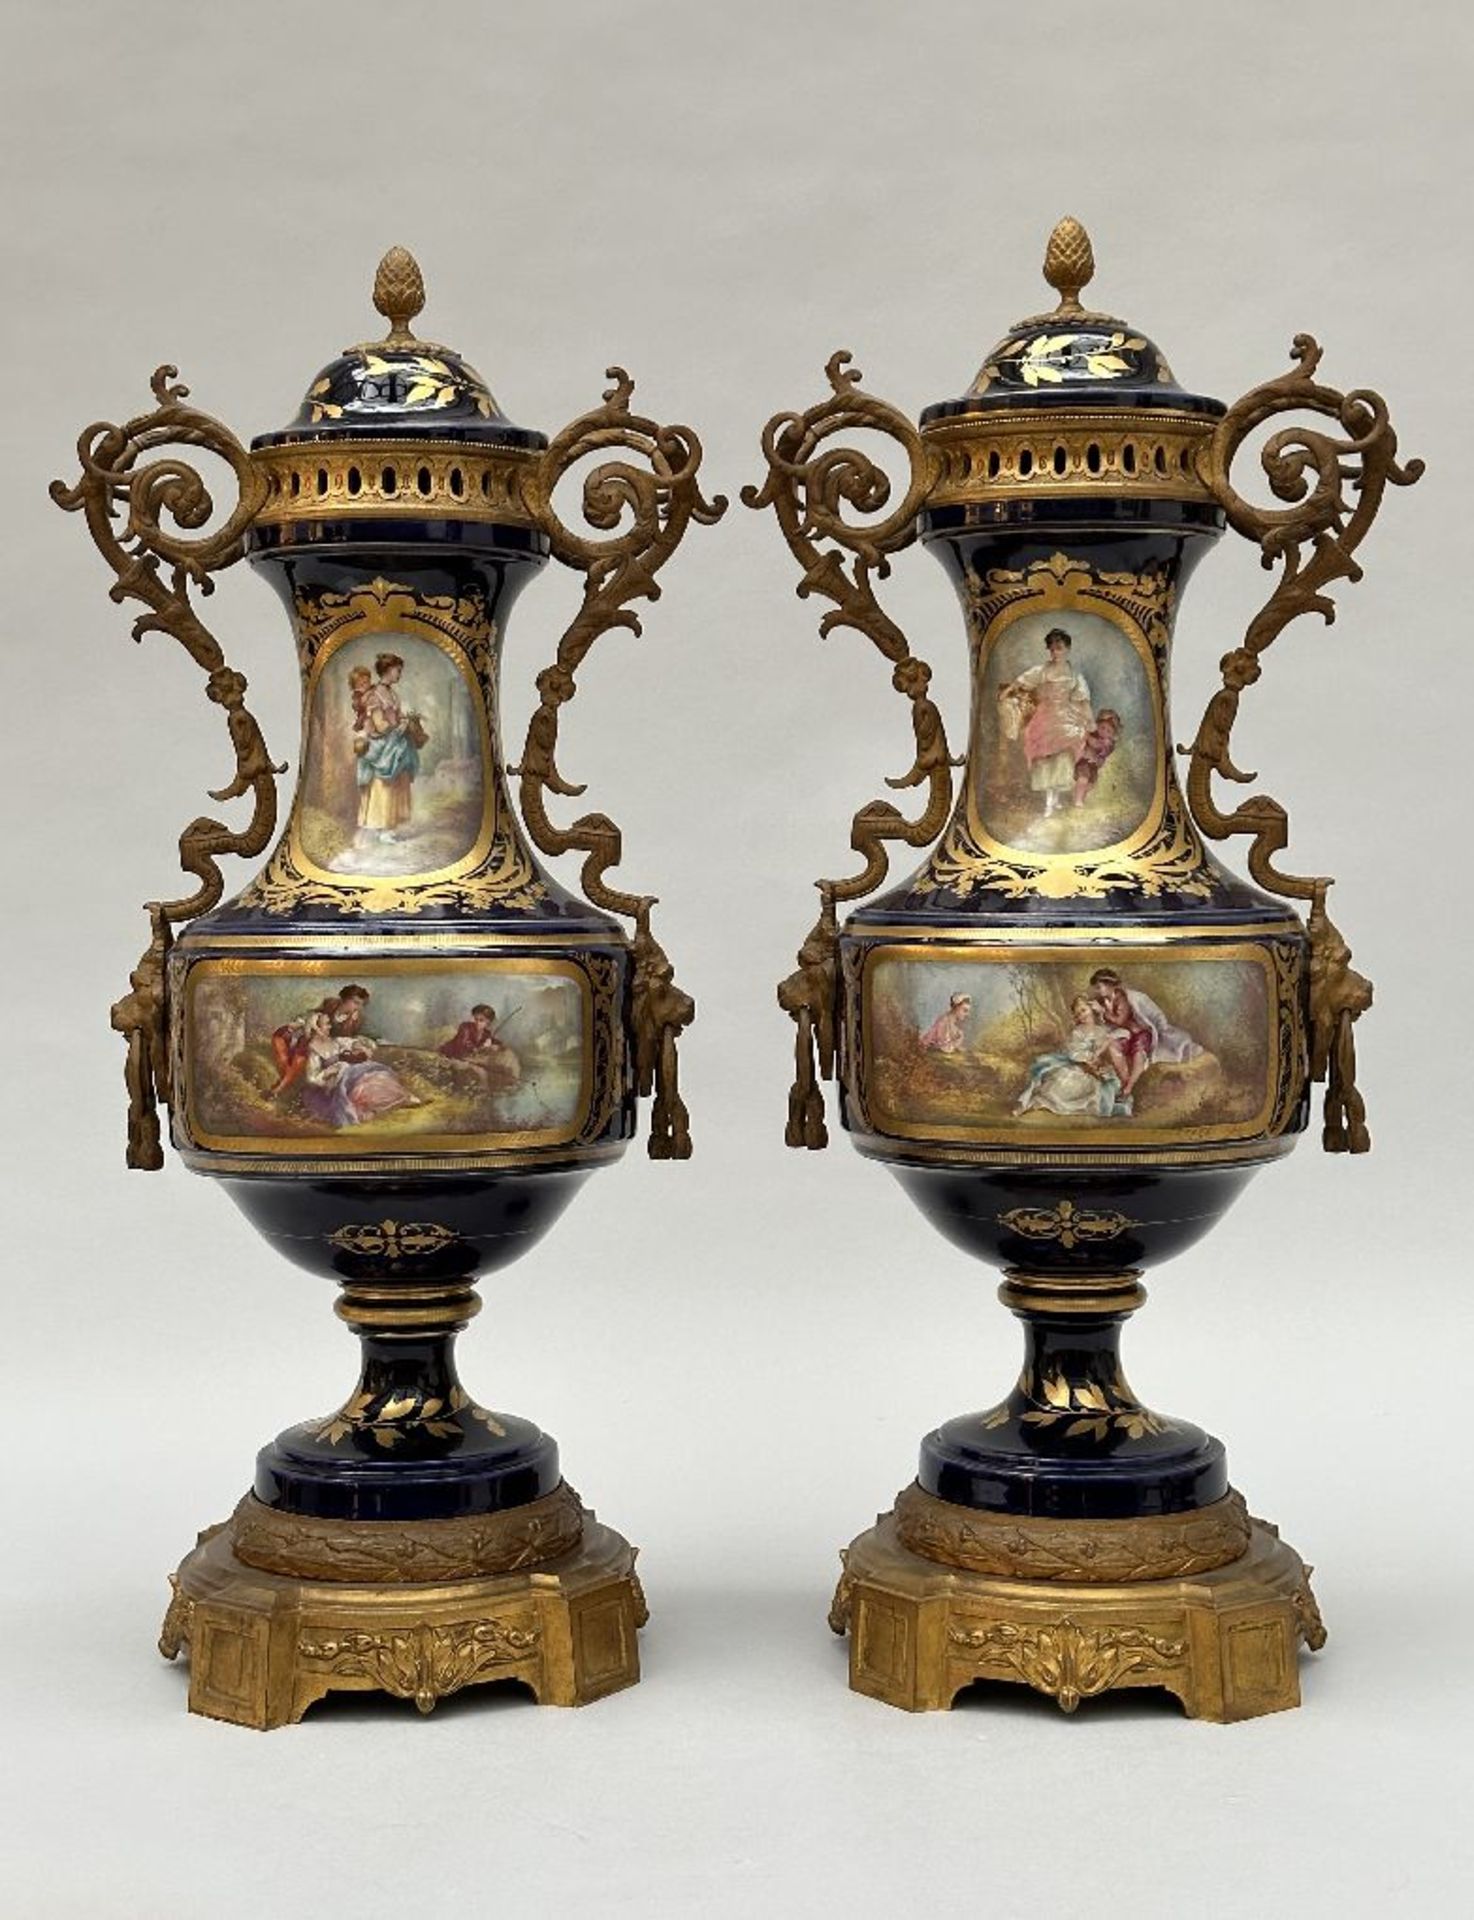 A pair of Sèvres porcelain vases with gilt bronze mounts, 19th century (*) - Image 5 of 9